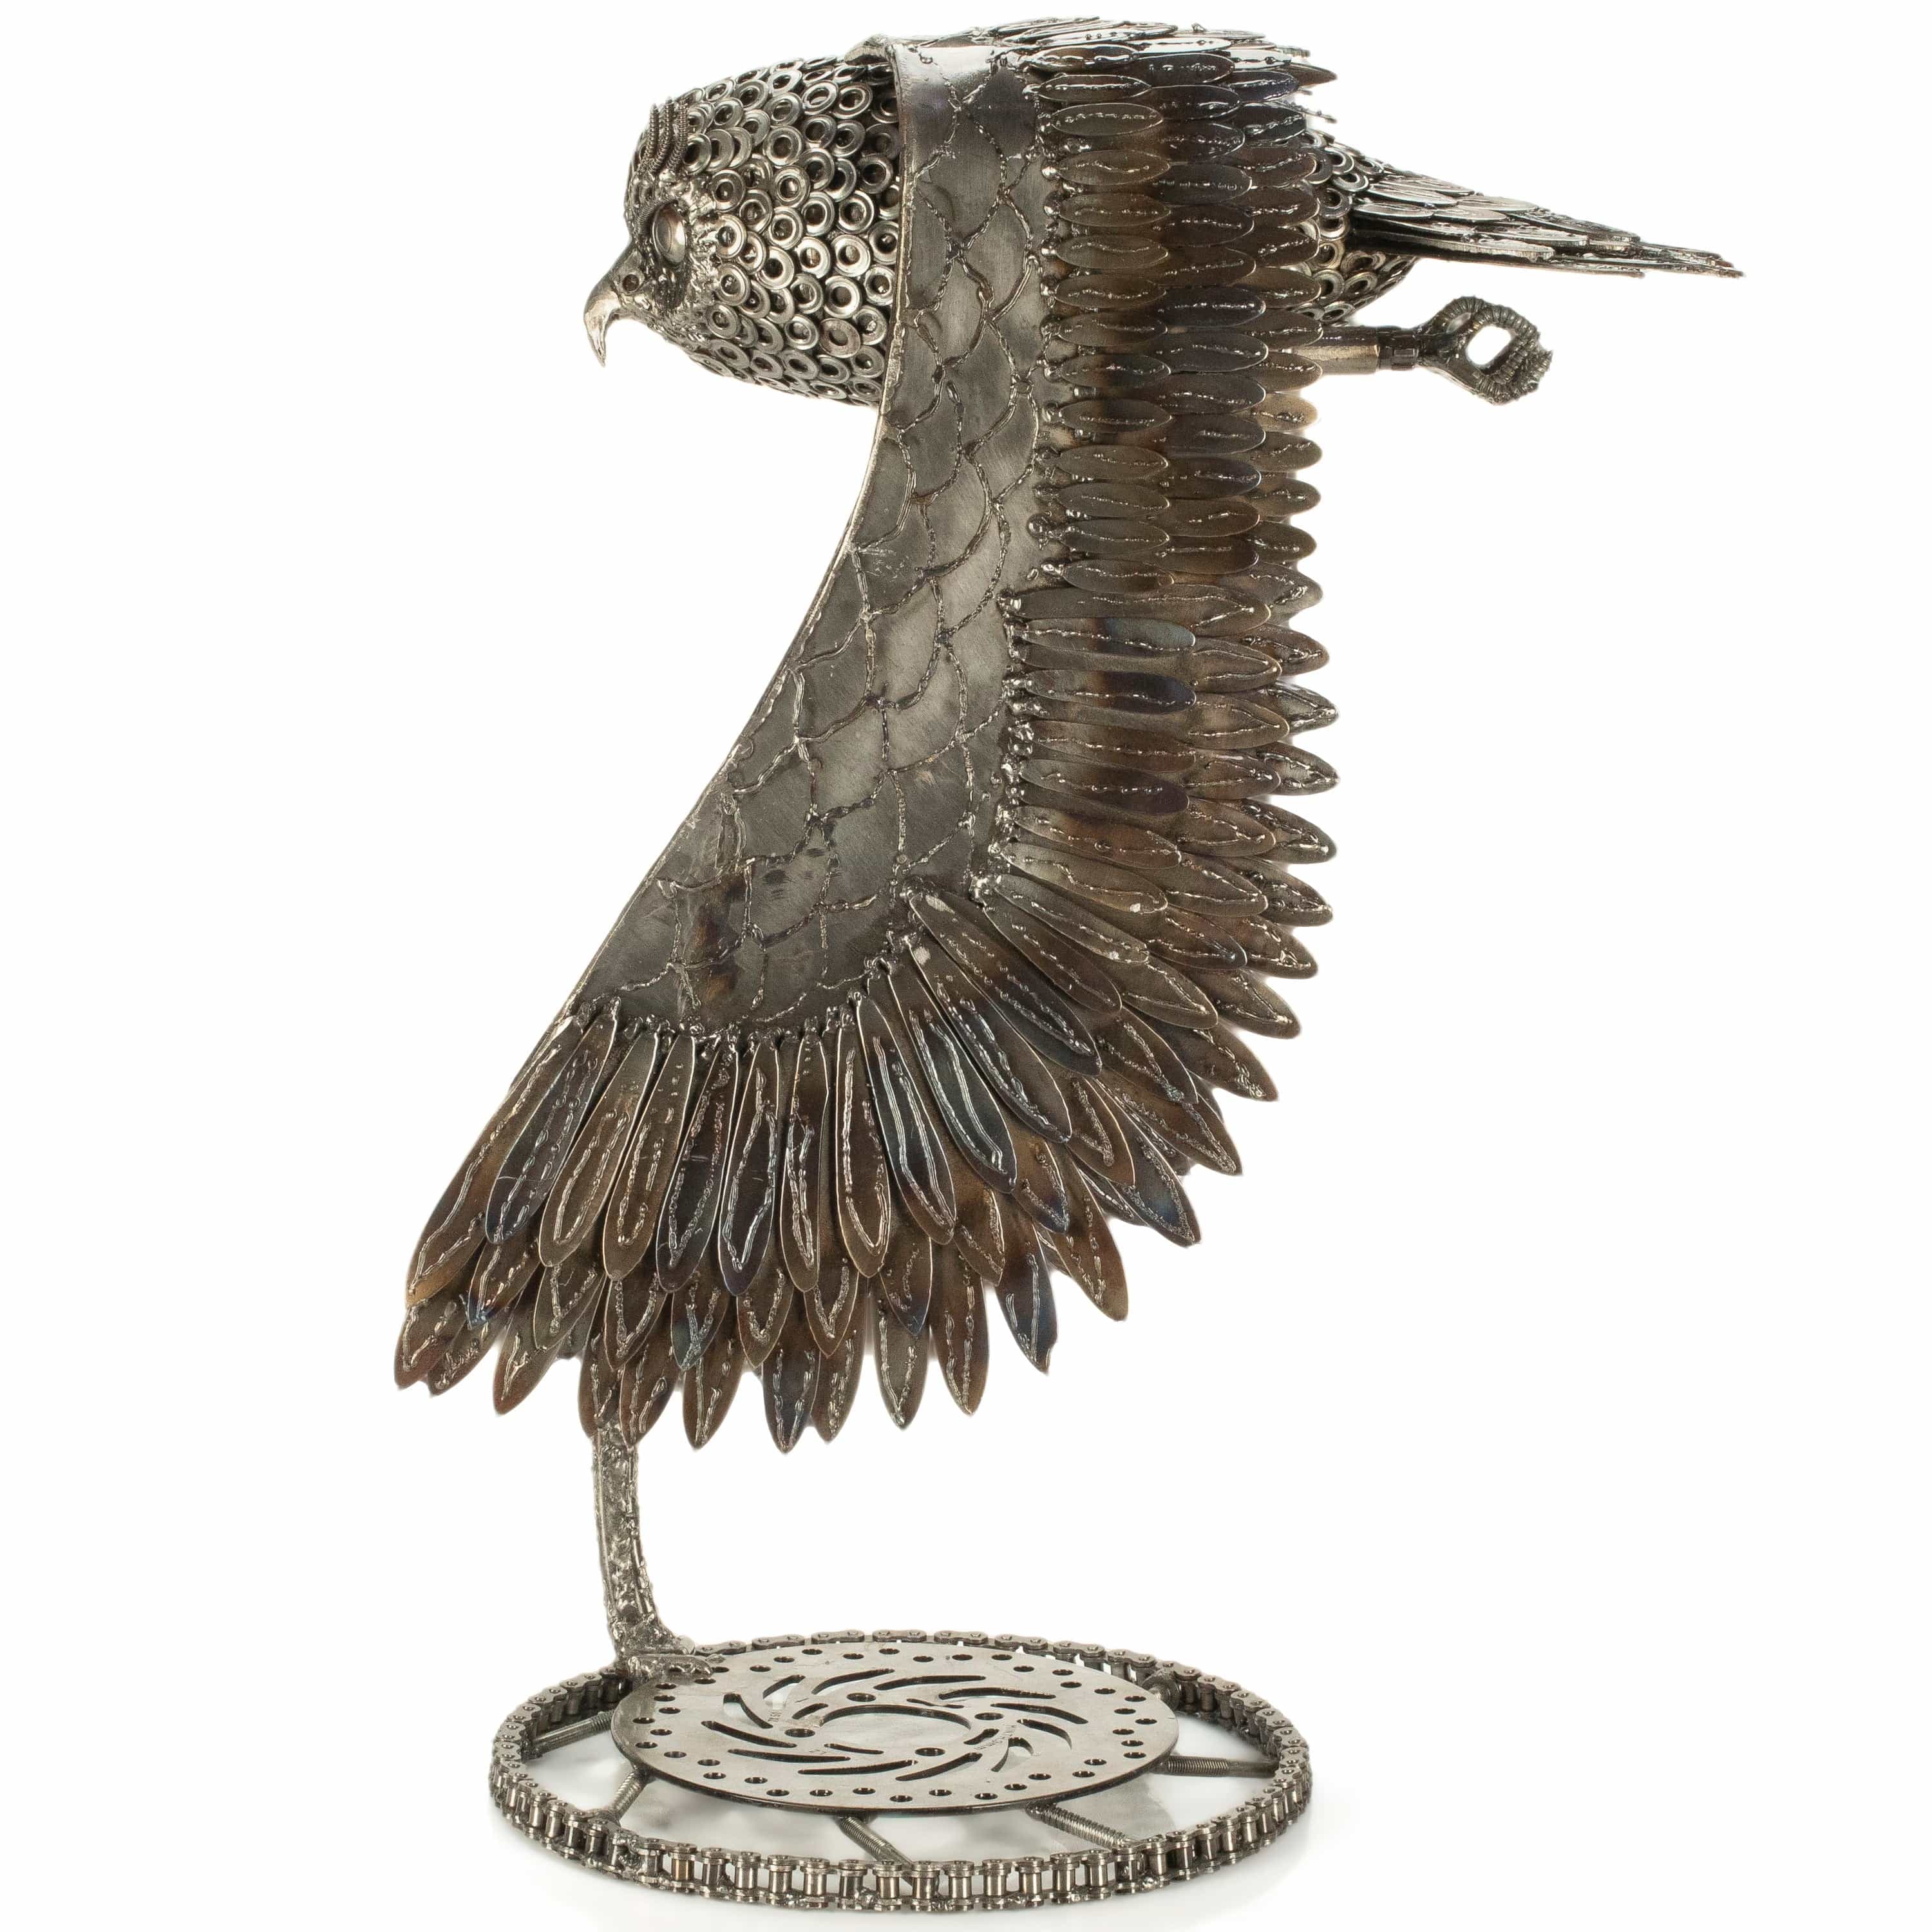 KALIFANO Recycled Metal Art 27" Flying Owl Inspired Recycled Metal Art Sculpture RMS-OWL45x68-PK